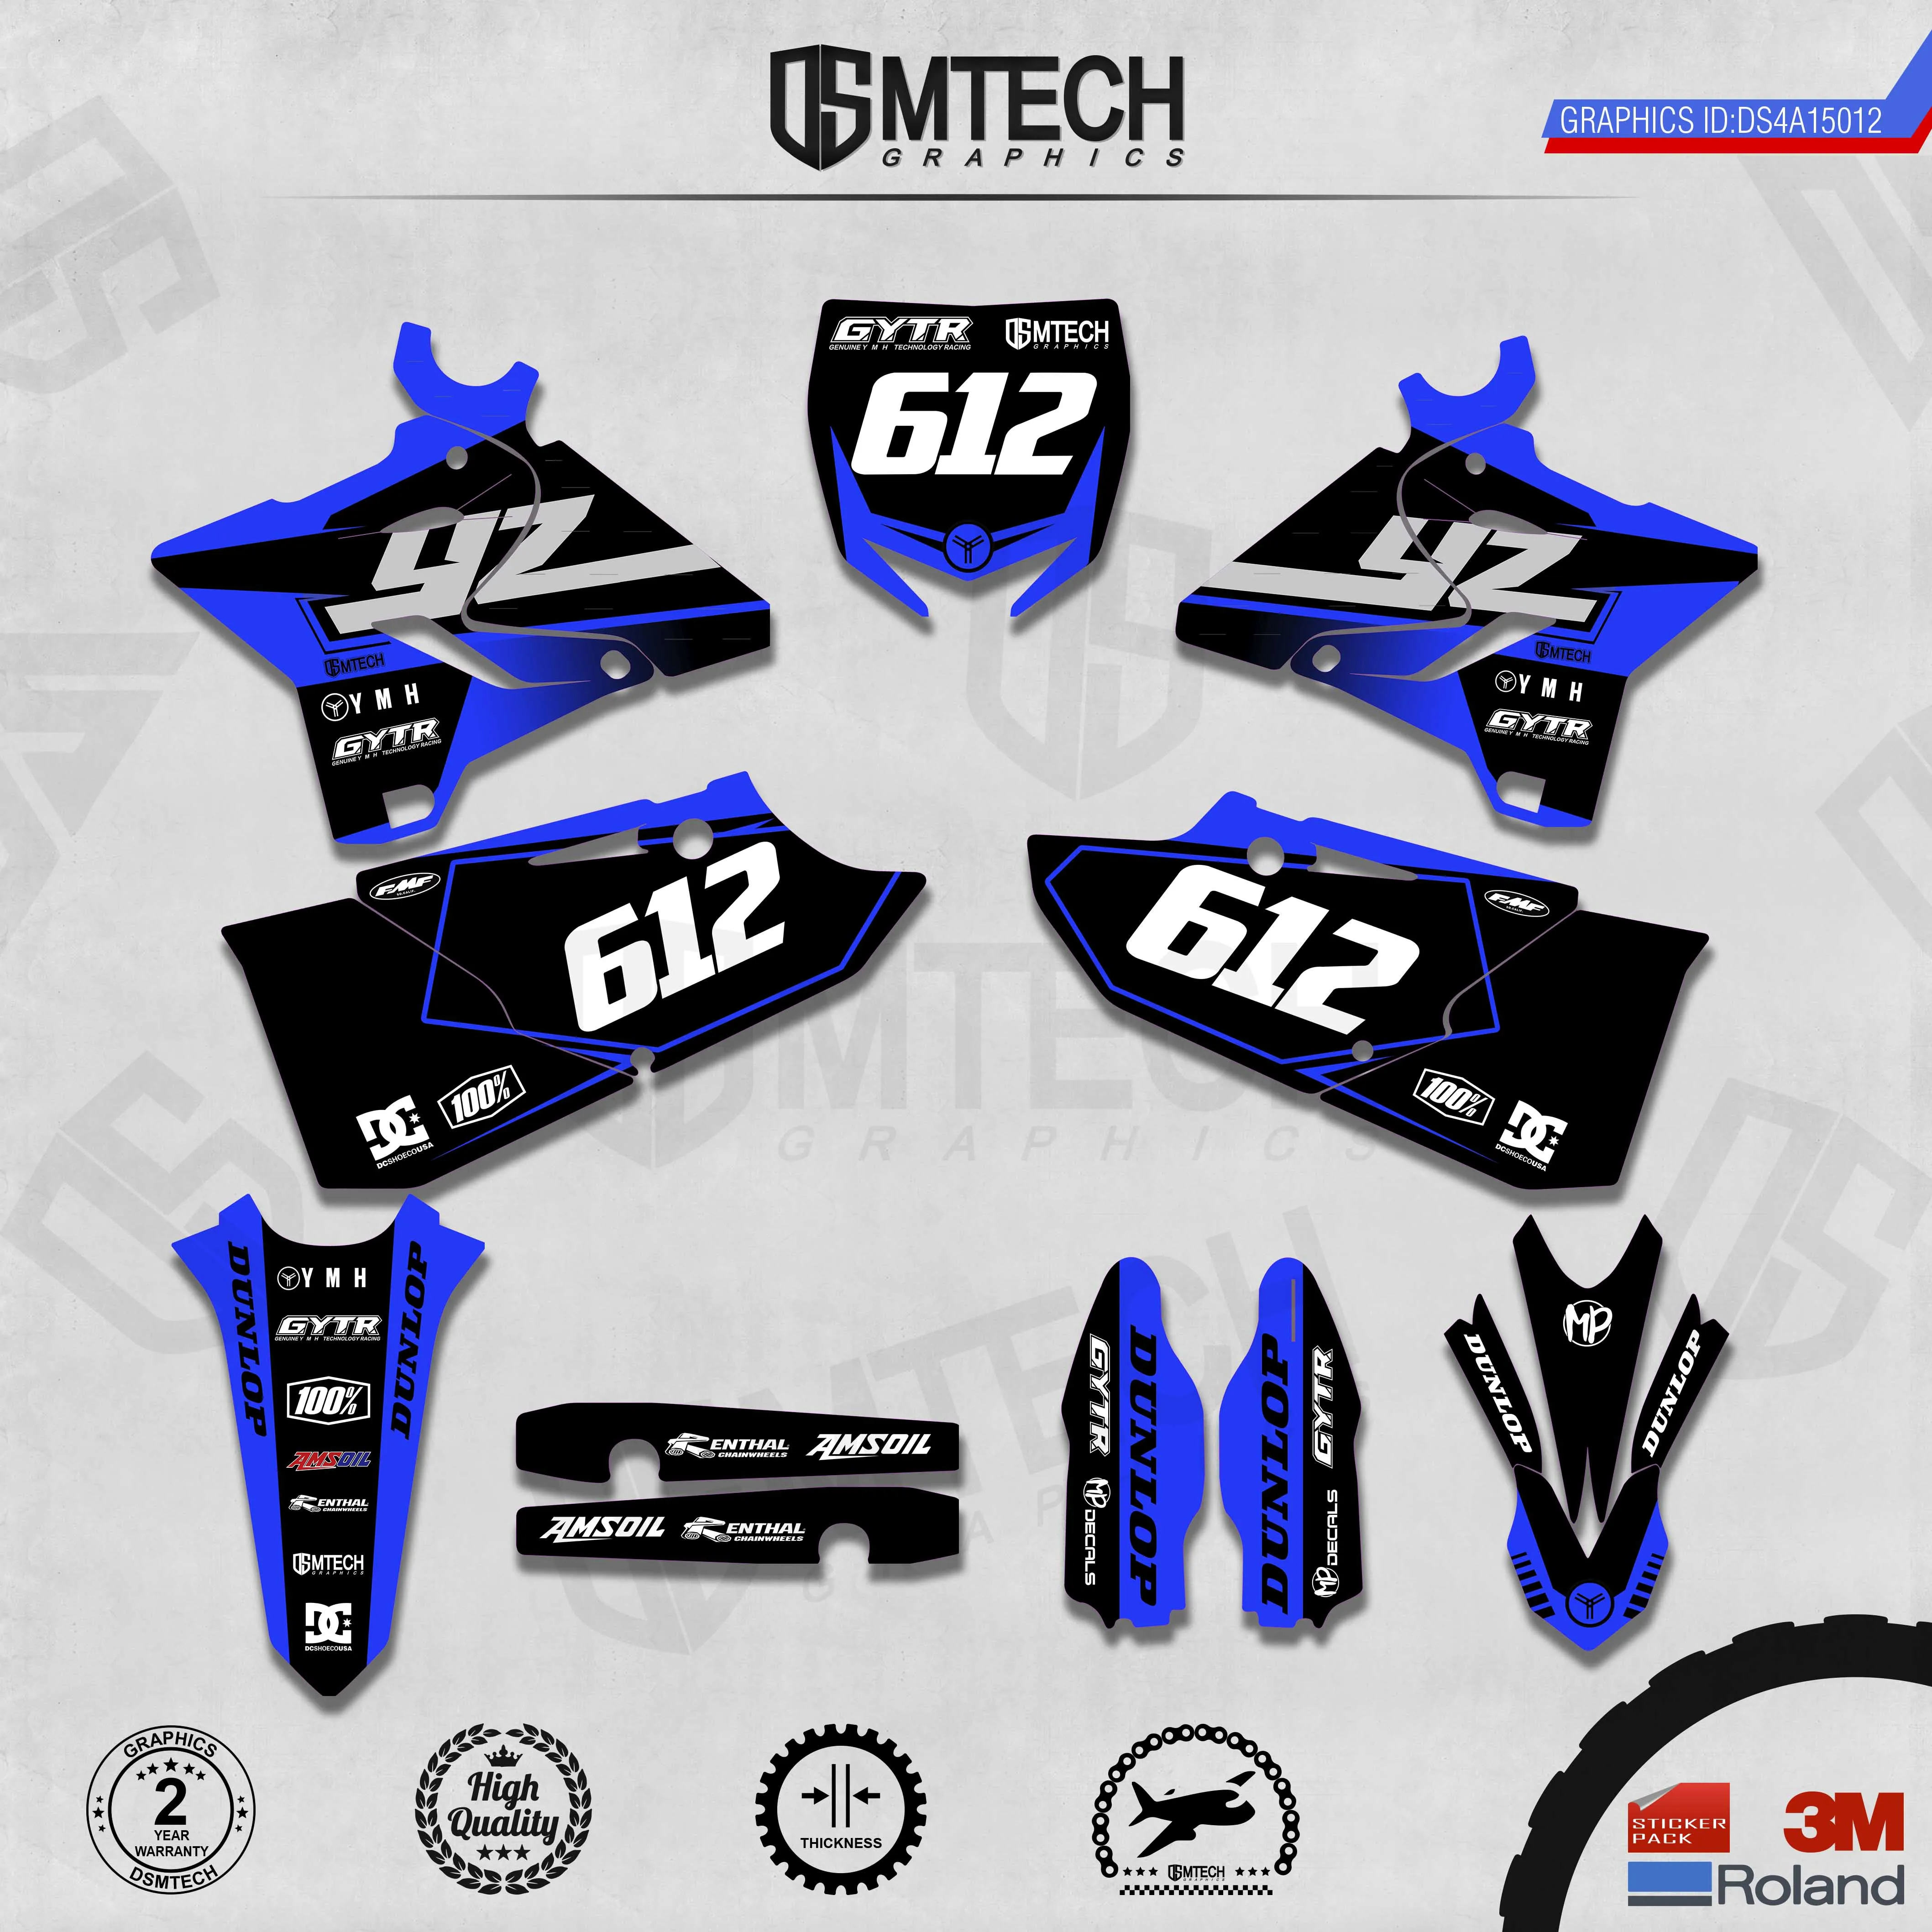 DSMTECH Customized Team Graphics Backgrounds Decals 3M Custom Stickers For   YZ125-250 Two Stroke 2015-2019  012